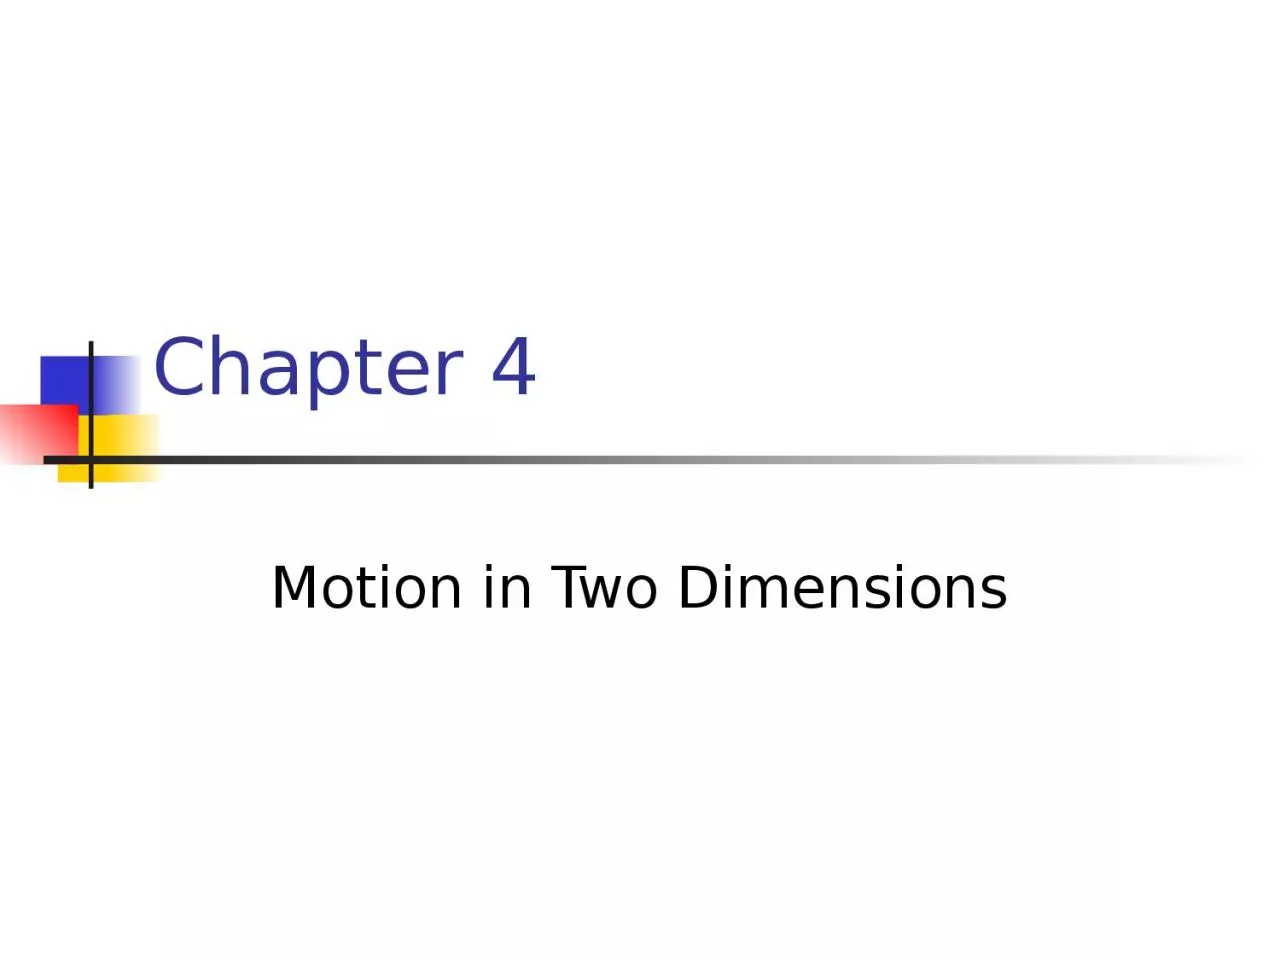 Chapter 4 Motion in Two Dimensions